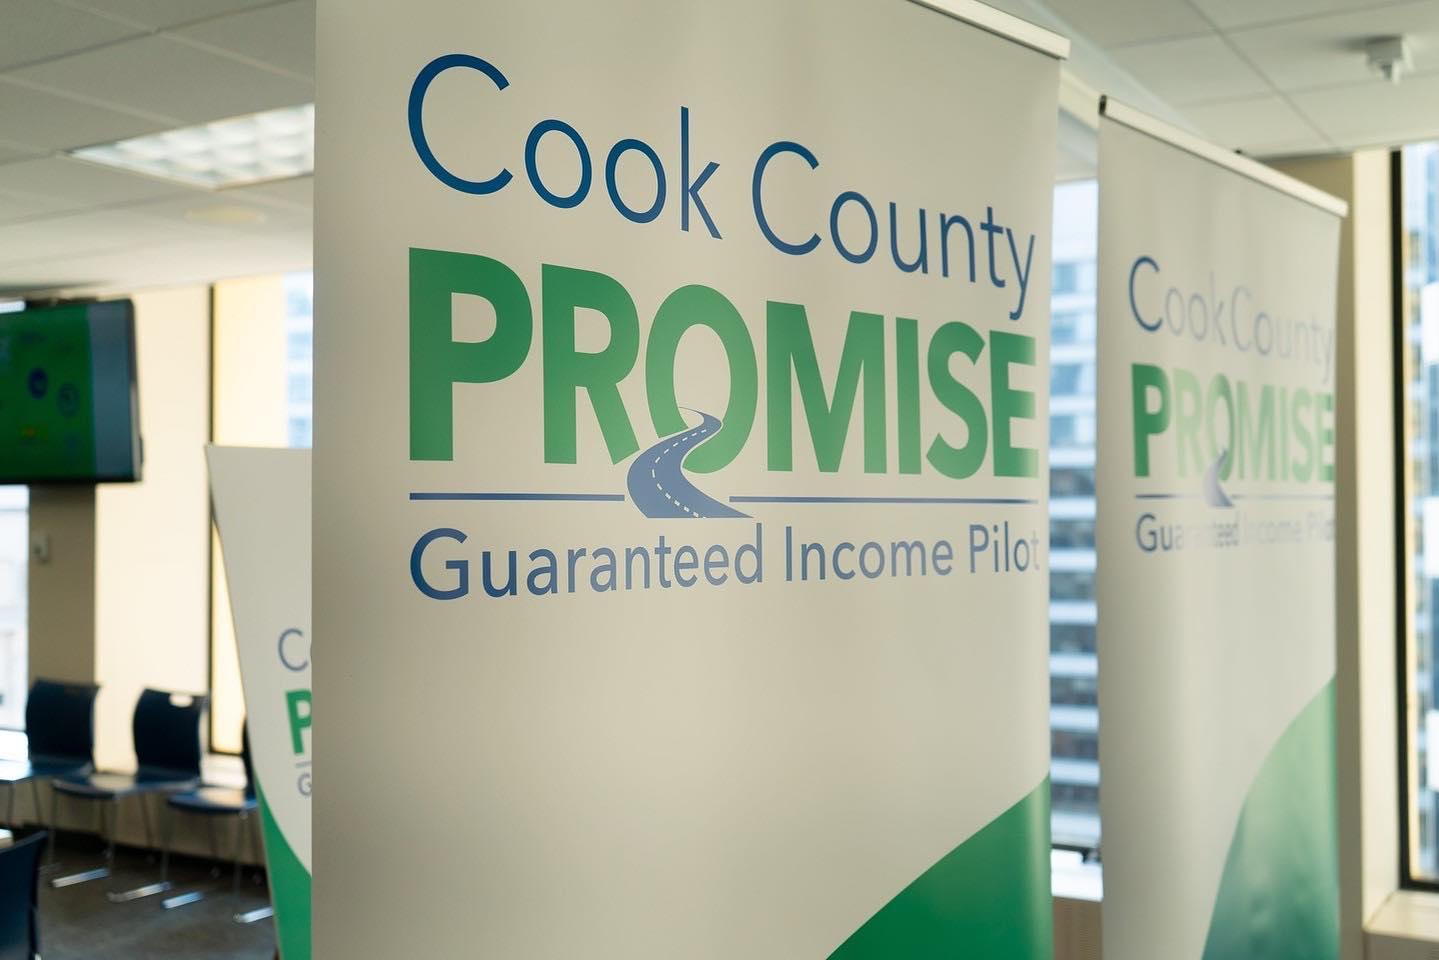 .

#repost @tonipreckwinkle

The applications for our Cook County Promise Guaranteed Income Pilot will begin on Oct. 6th! Through a countywide drawing, 3,250 eligible residents will be selected to receive $500/month for two years. For more info, visit: www.engagecookcounty.com/promise